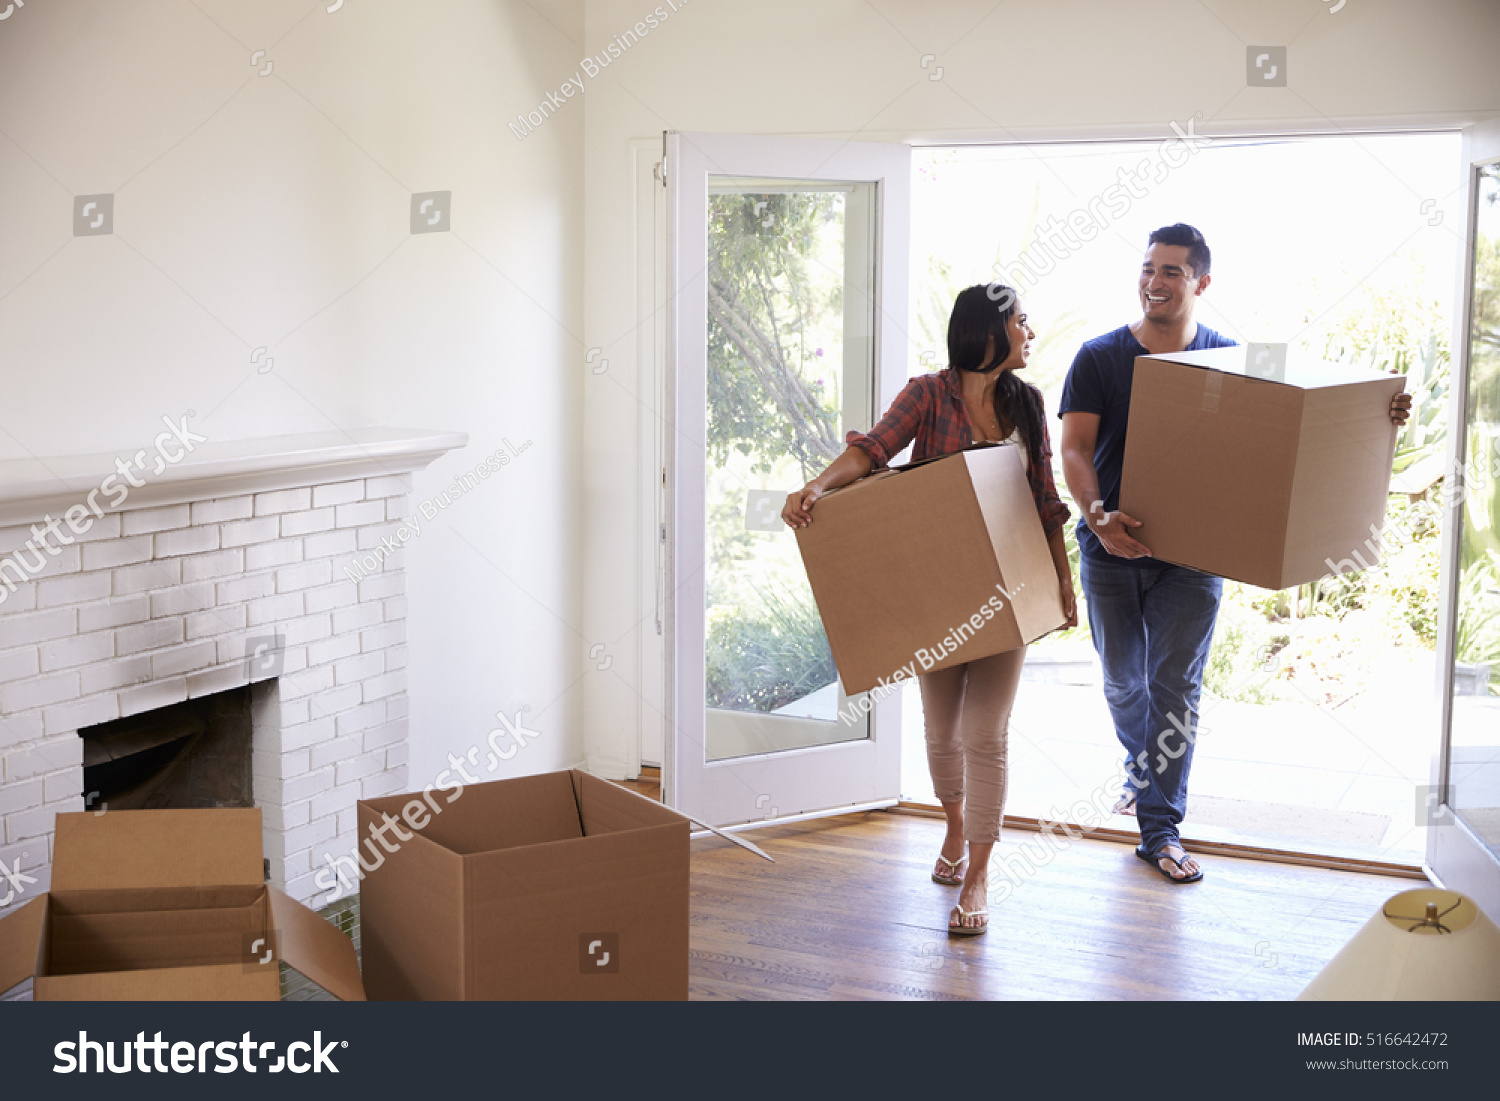 Couple Carrying Boxes Into New Home On Moving Day #516642472